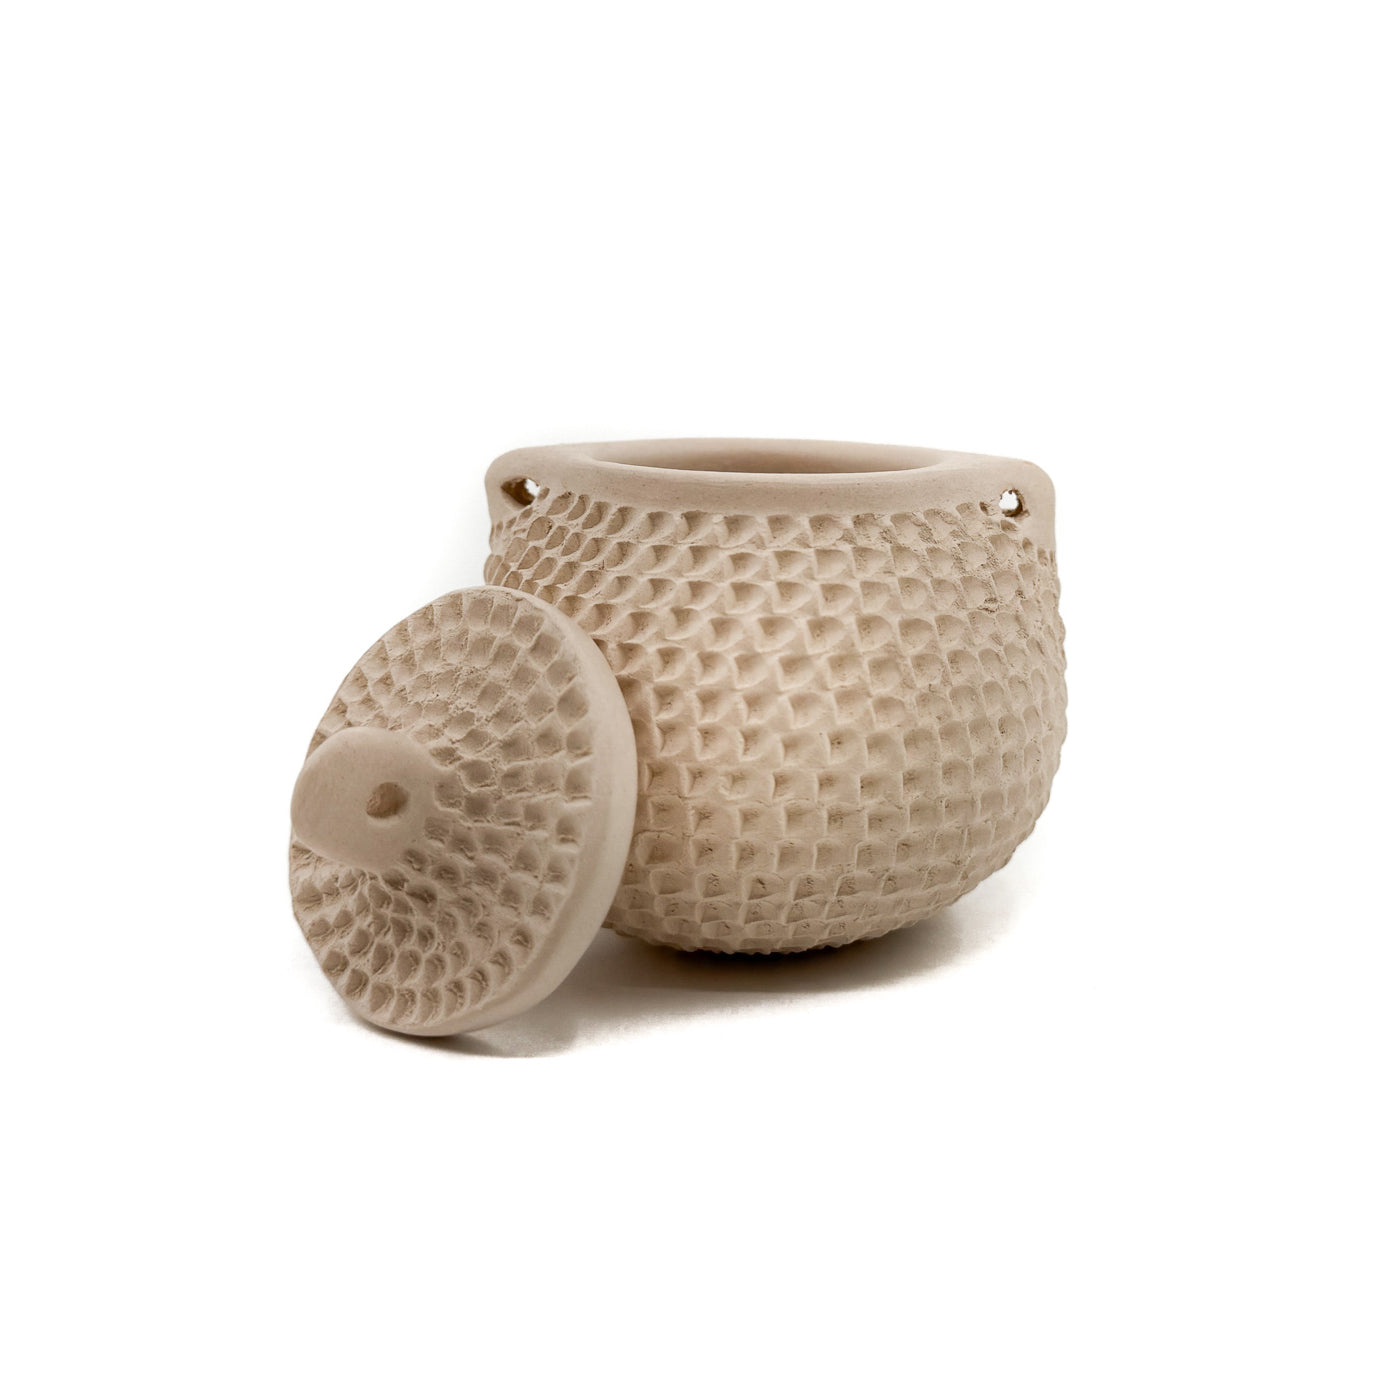 – Ortiz Native-Seeds-Search Mata Pottery Page – 2